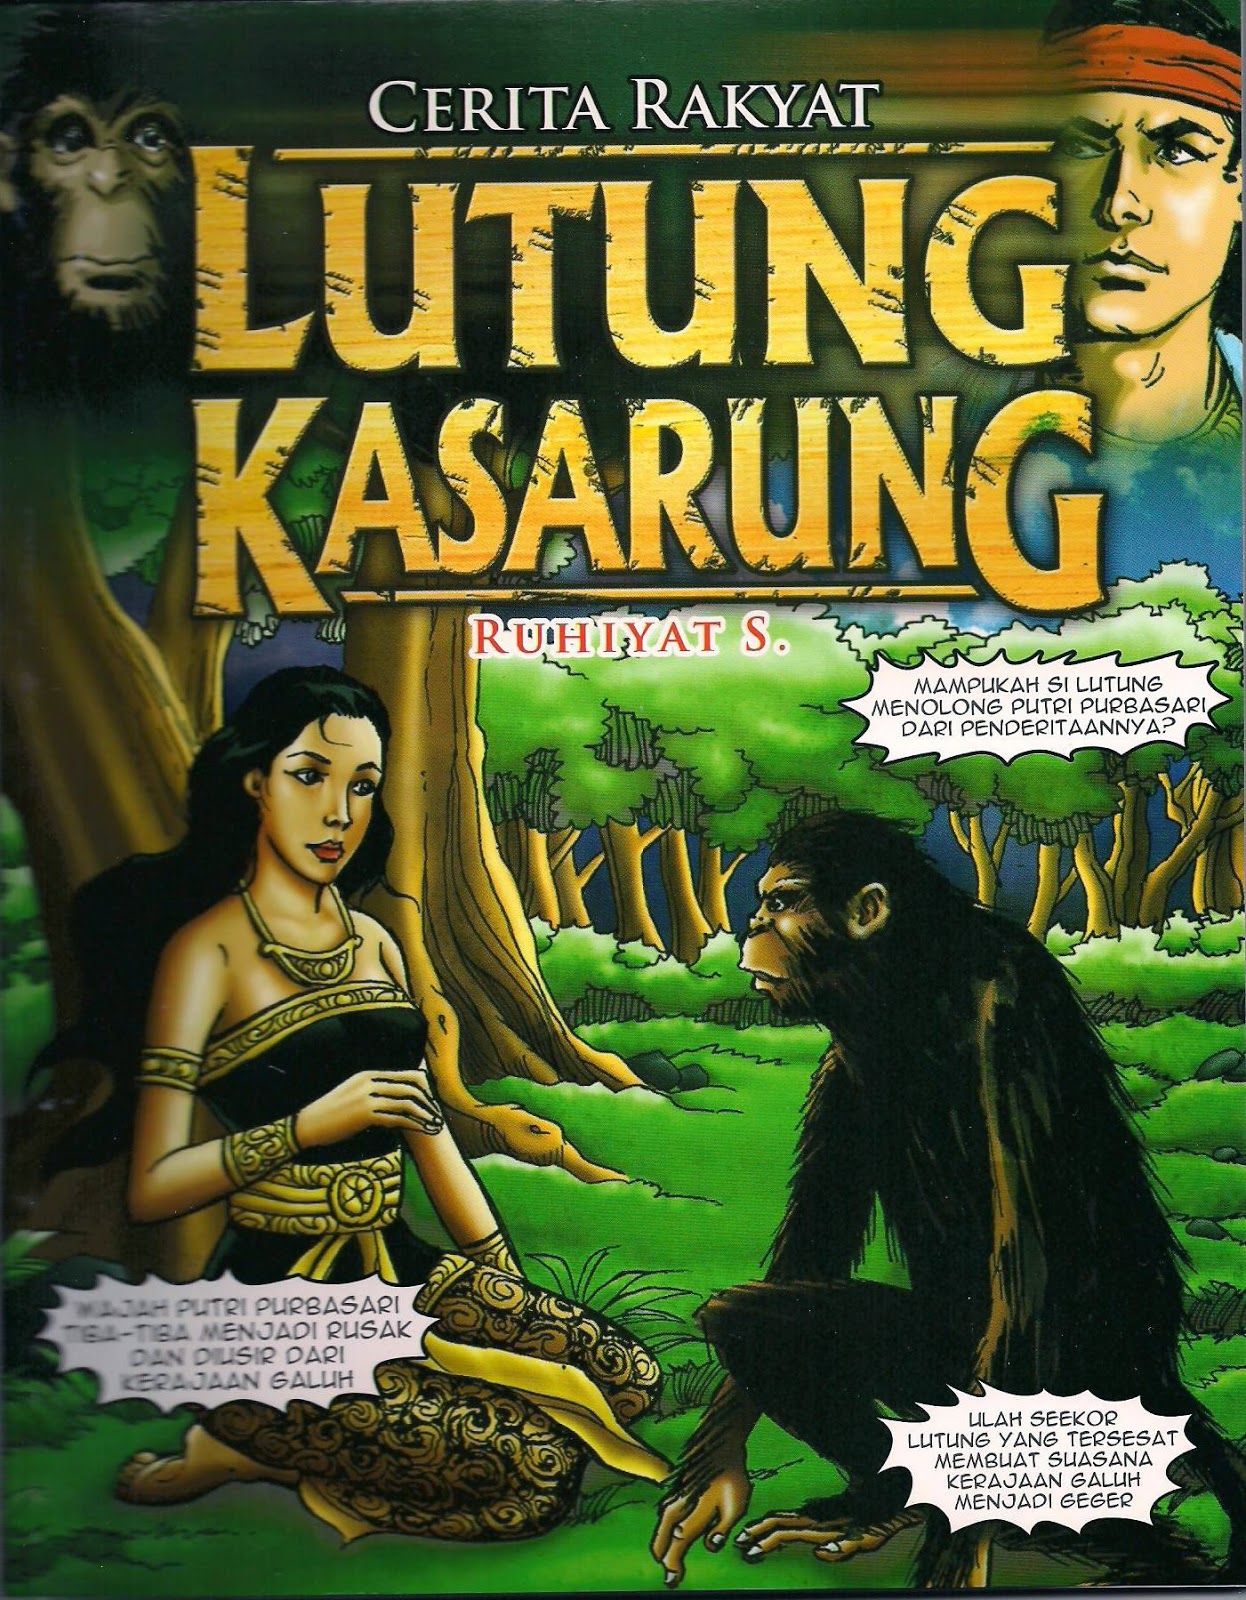 Lutung Kasarung The Untold Legend of a Talking Ape West Java Folklore Part 1